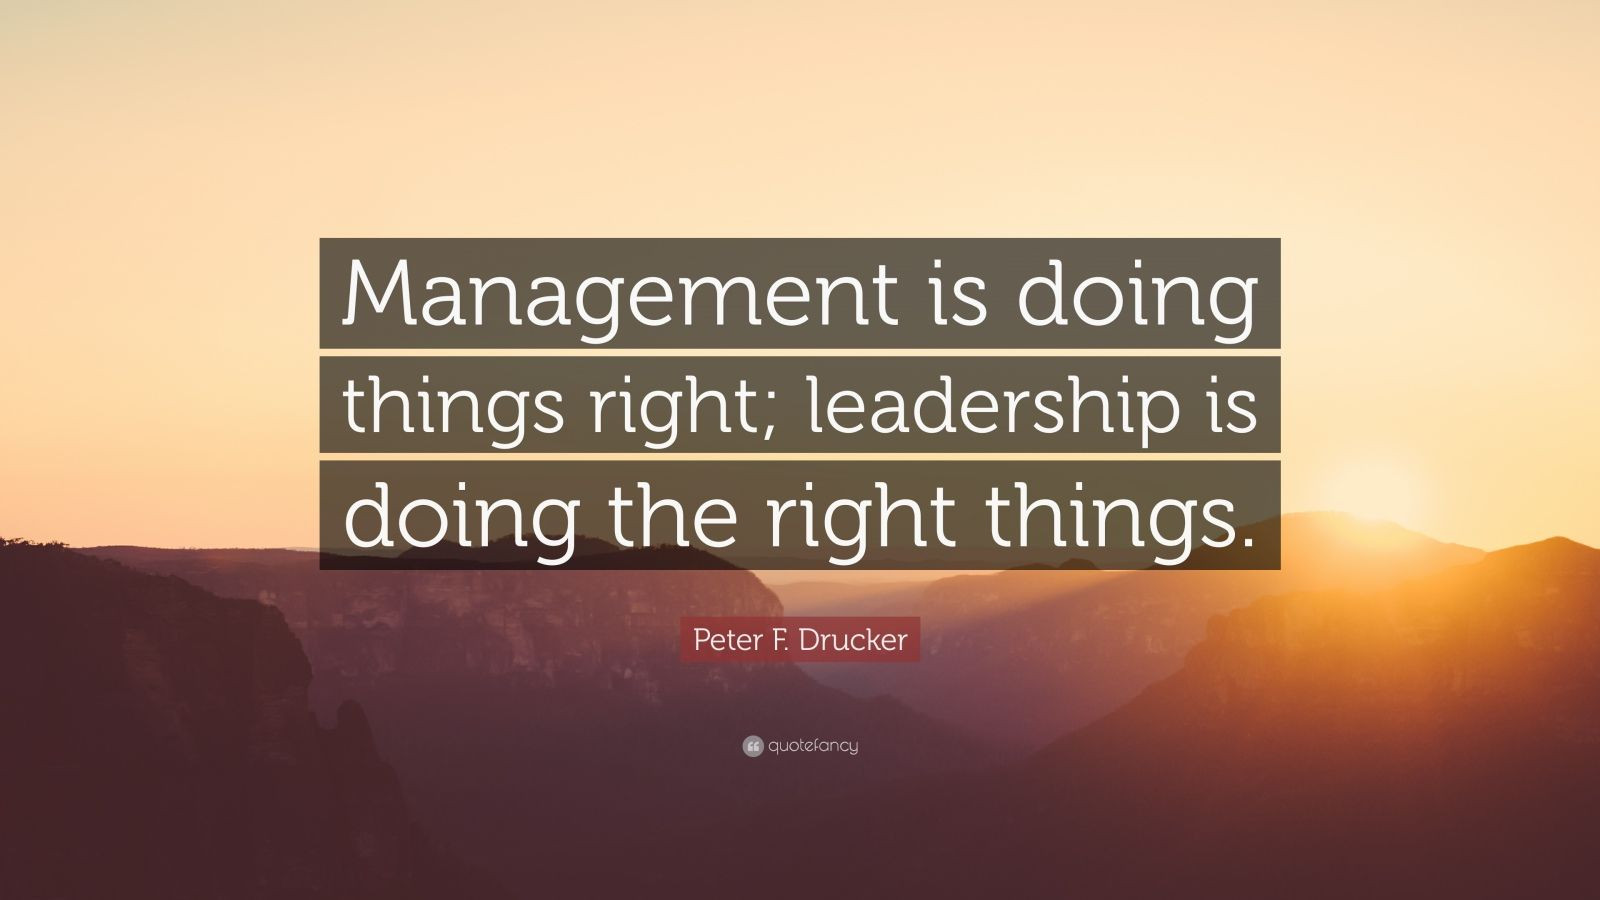 Positive Leadership Quotes
 Leadership Quotes 25 wallpapers Quotefancy